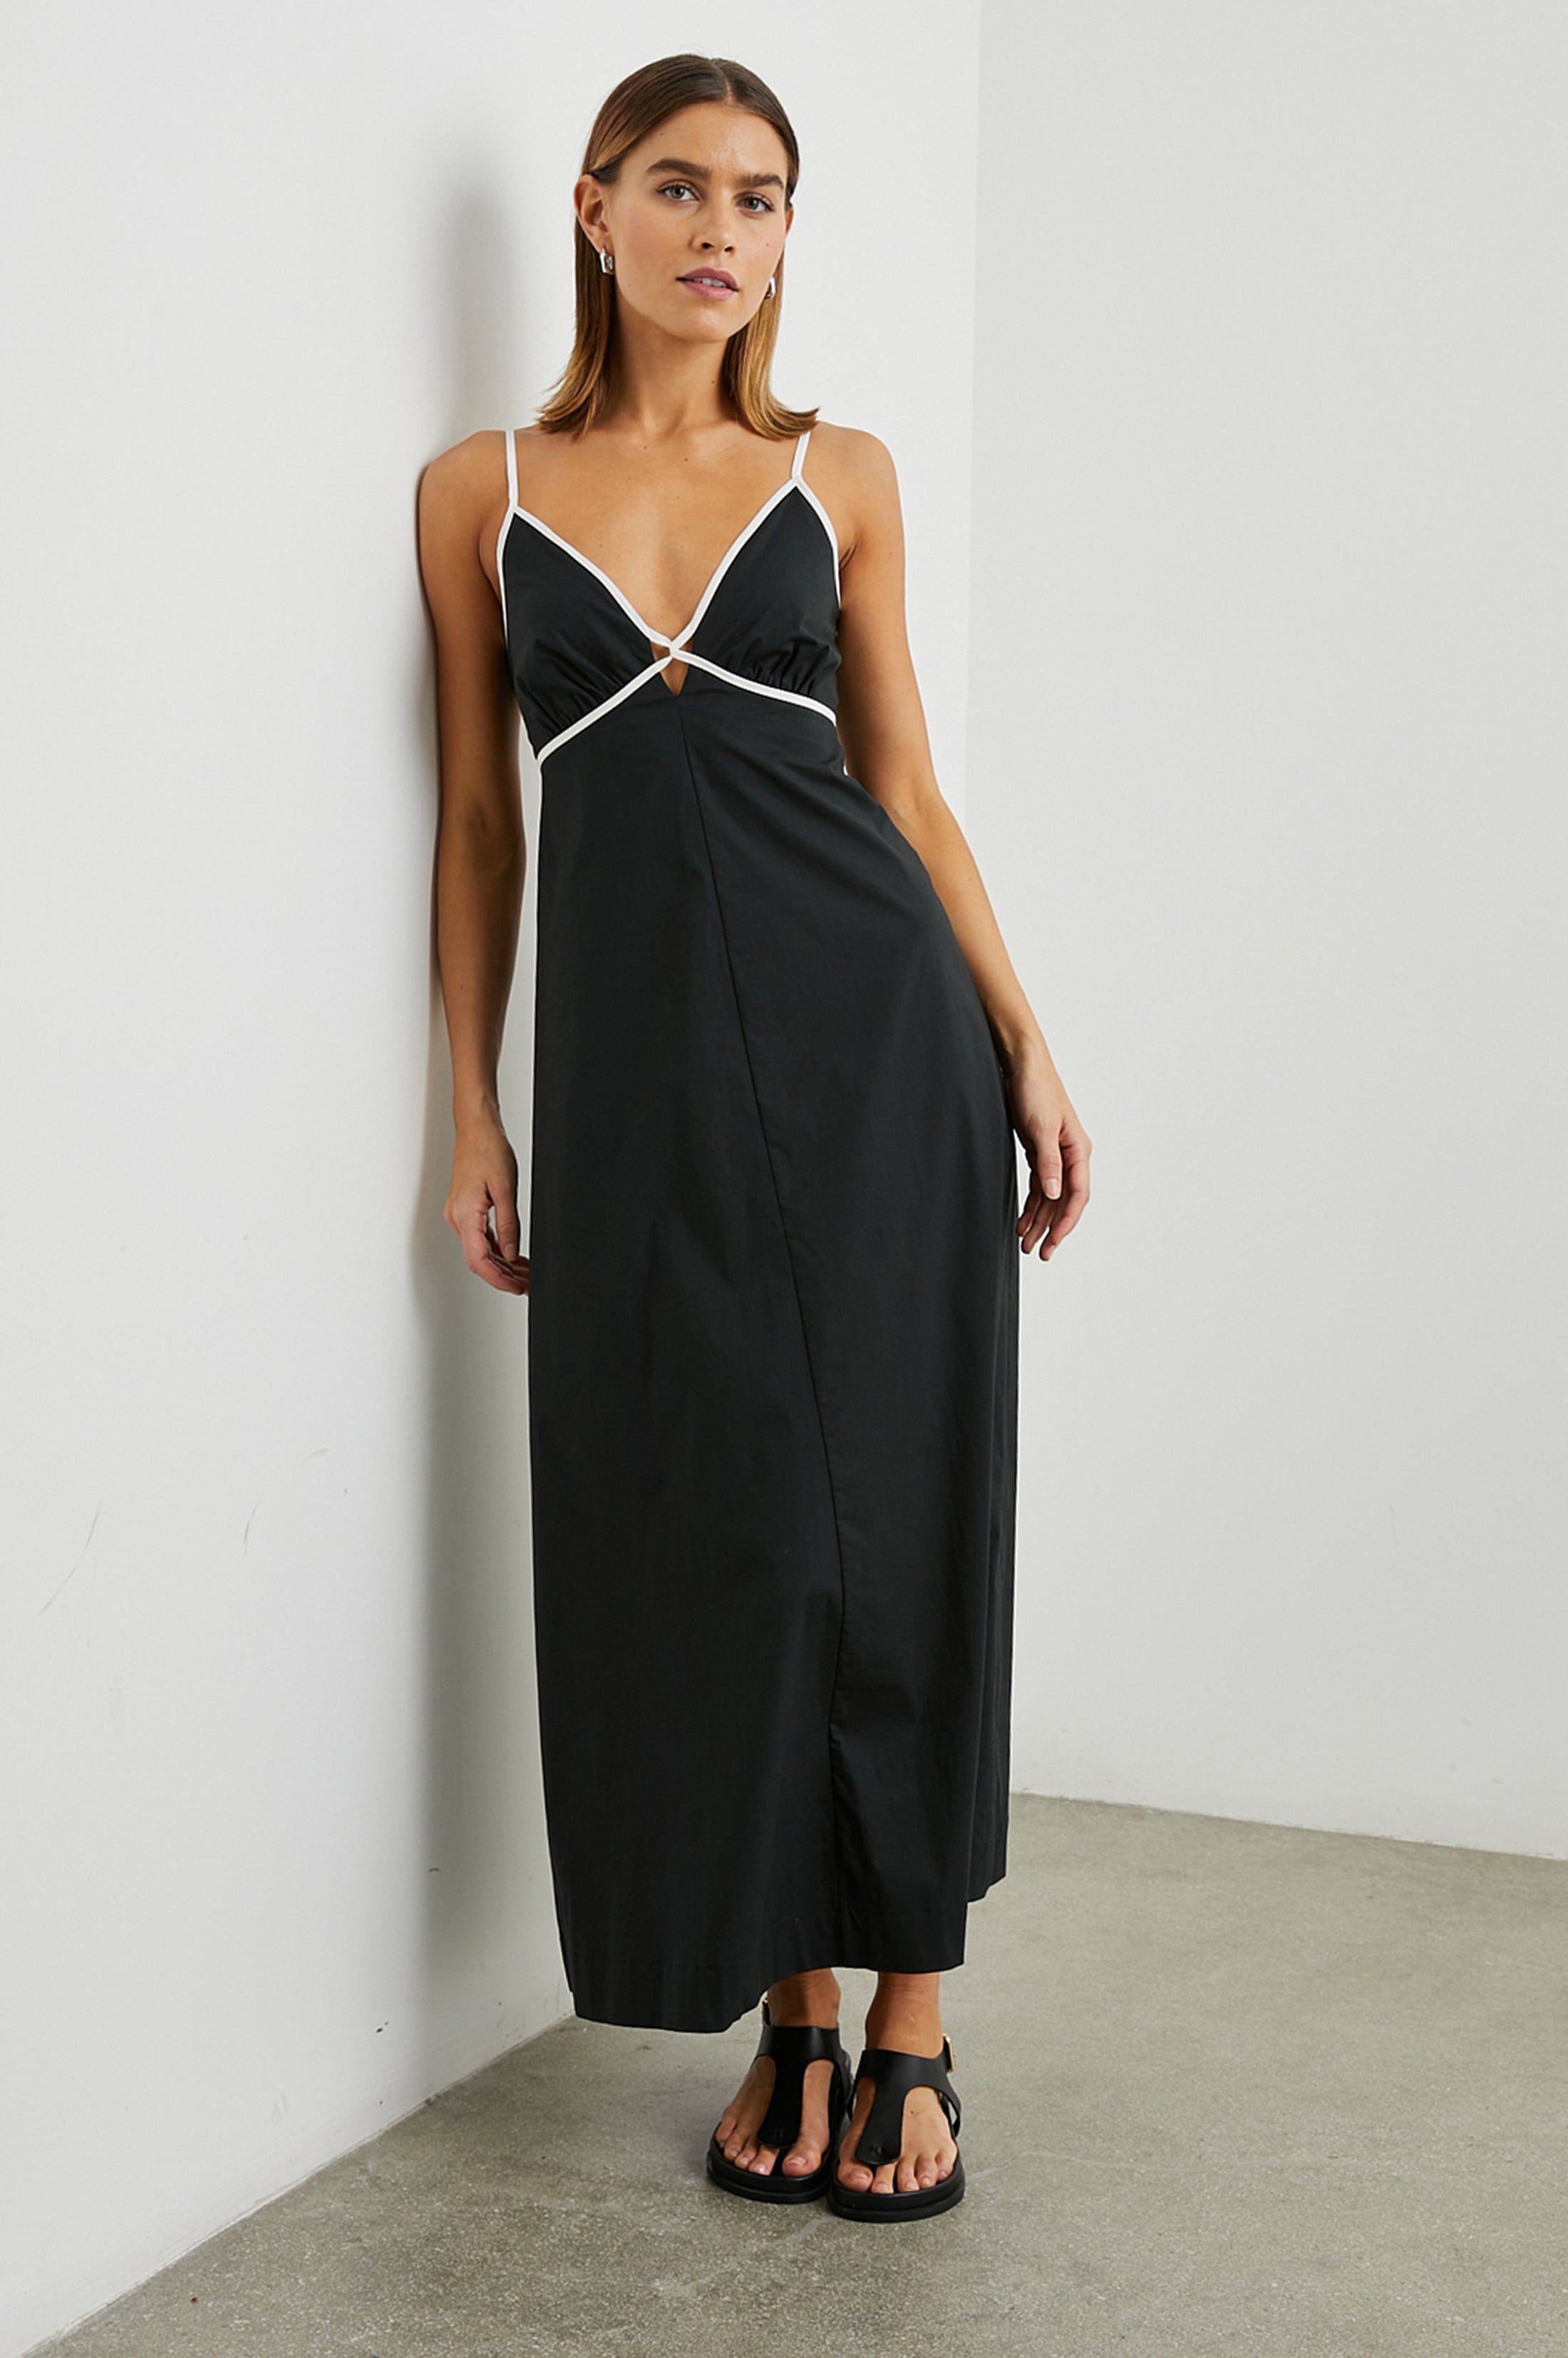 Black midi length dress with white trim at the bust and straps